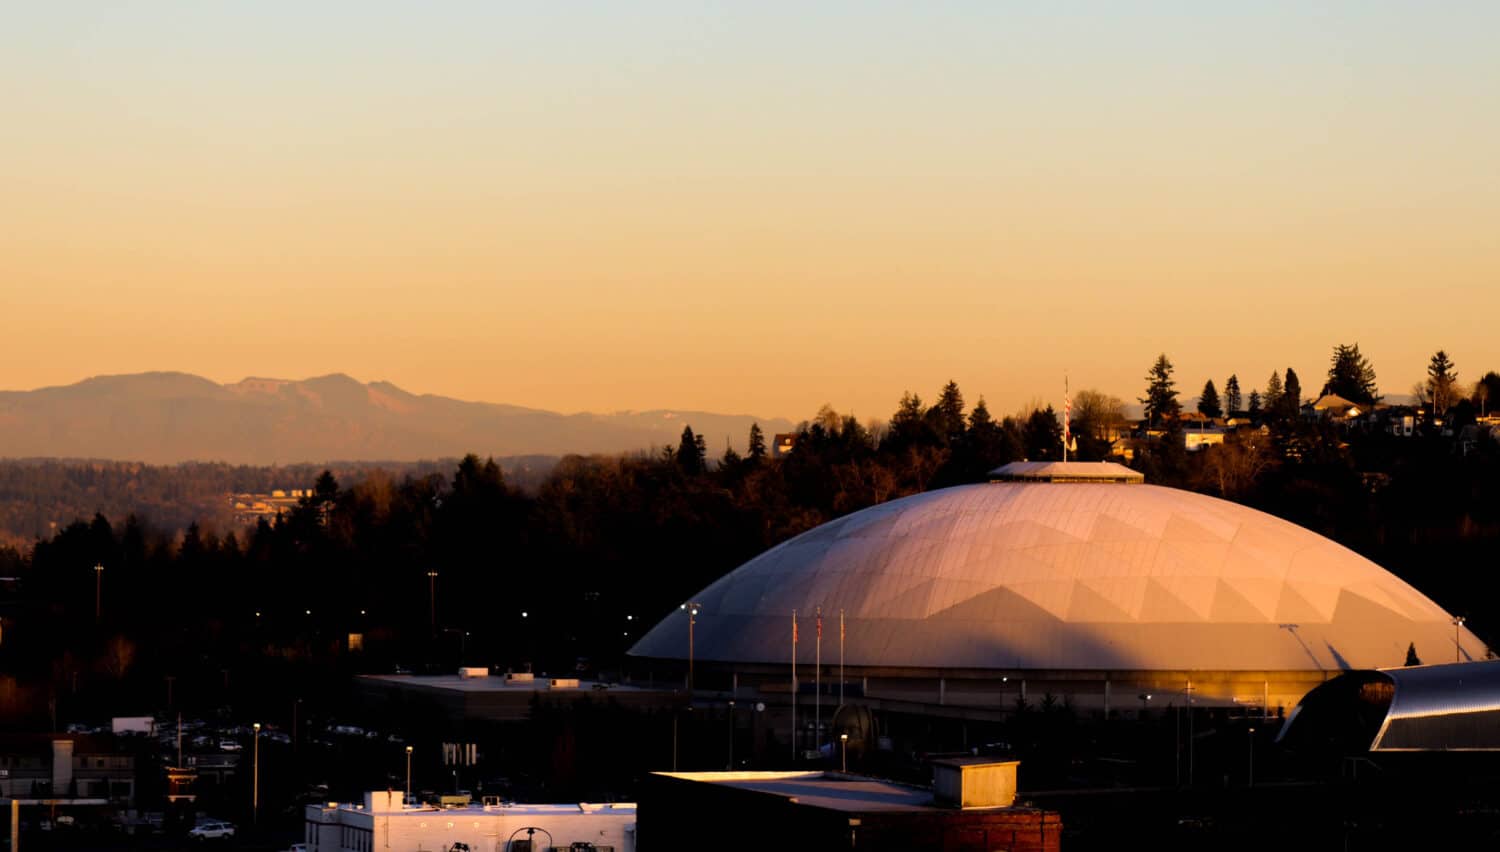 Tacoma , Washington where the reflections of the sun bring breathtaking views over the magnificent Tacoma Dome